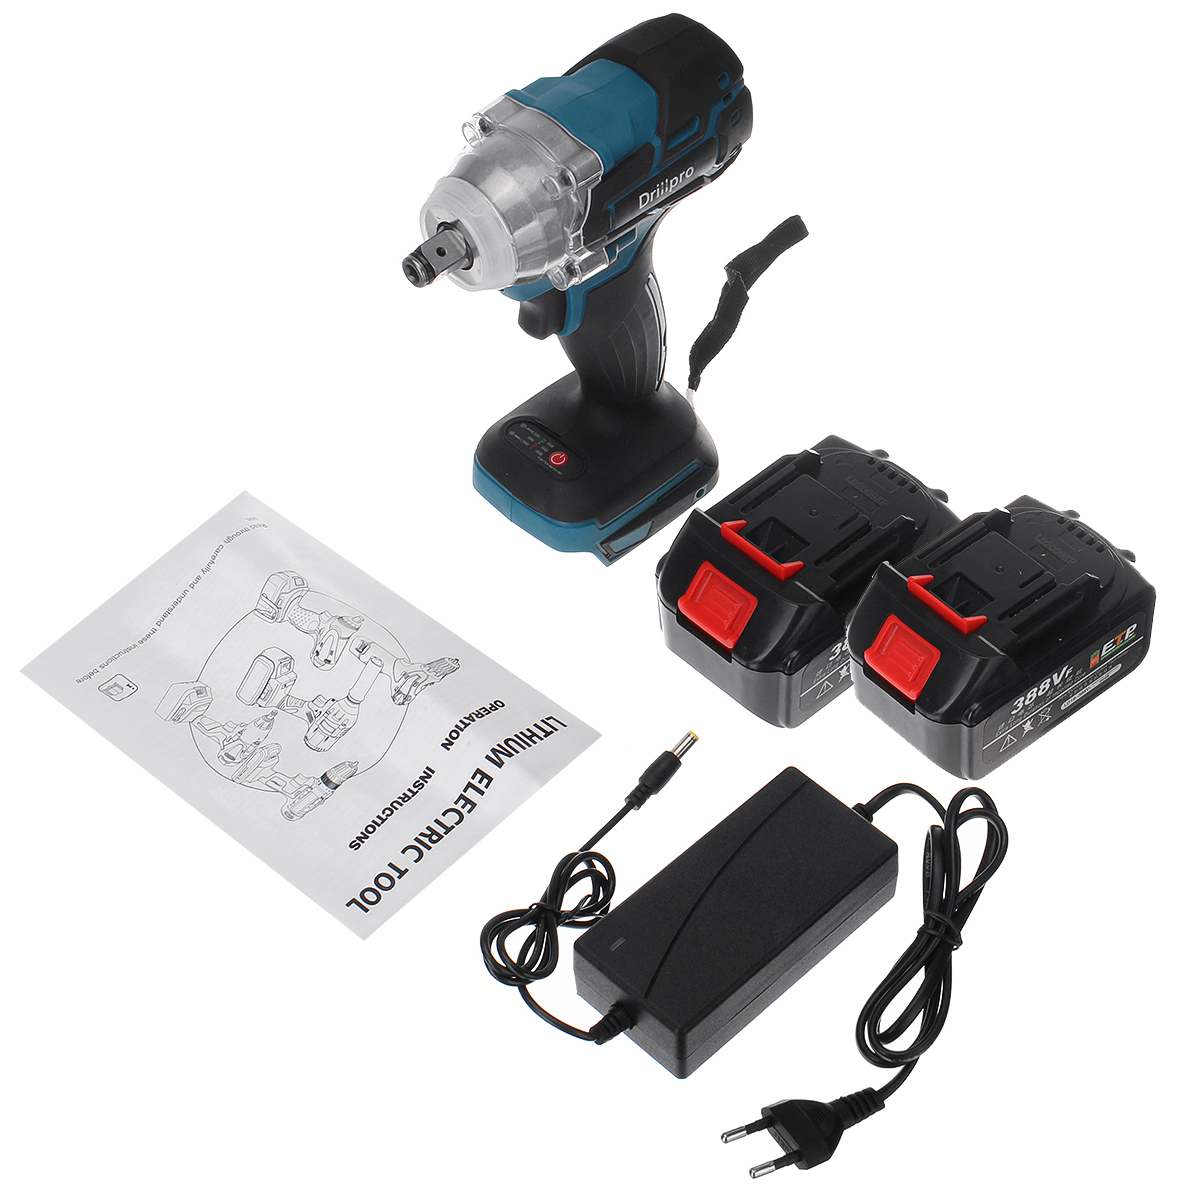 388vf 520N.M Brushless Cordless Electric Impact Wrench 1/2 inch Power Tools with 15000Amh Li Battery Adapt to Makita 18V Battery